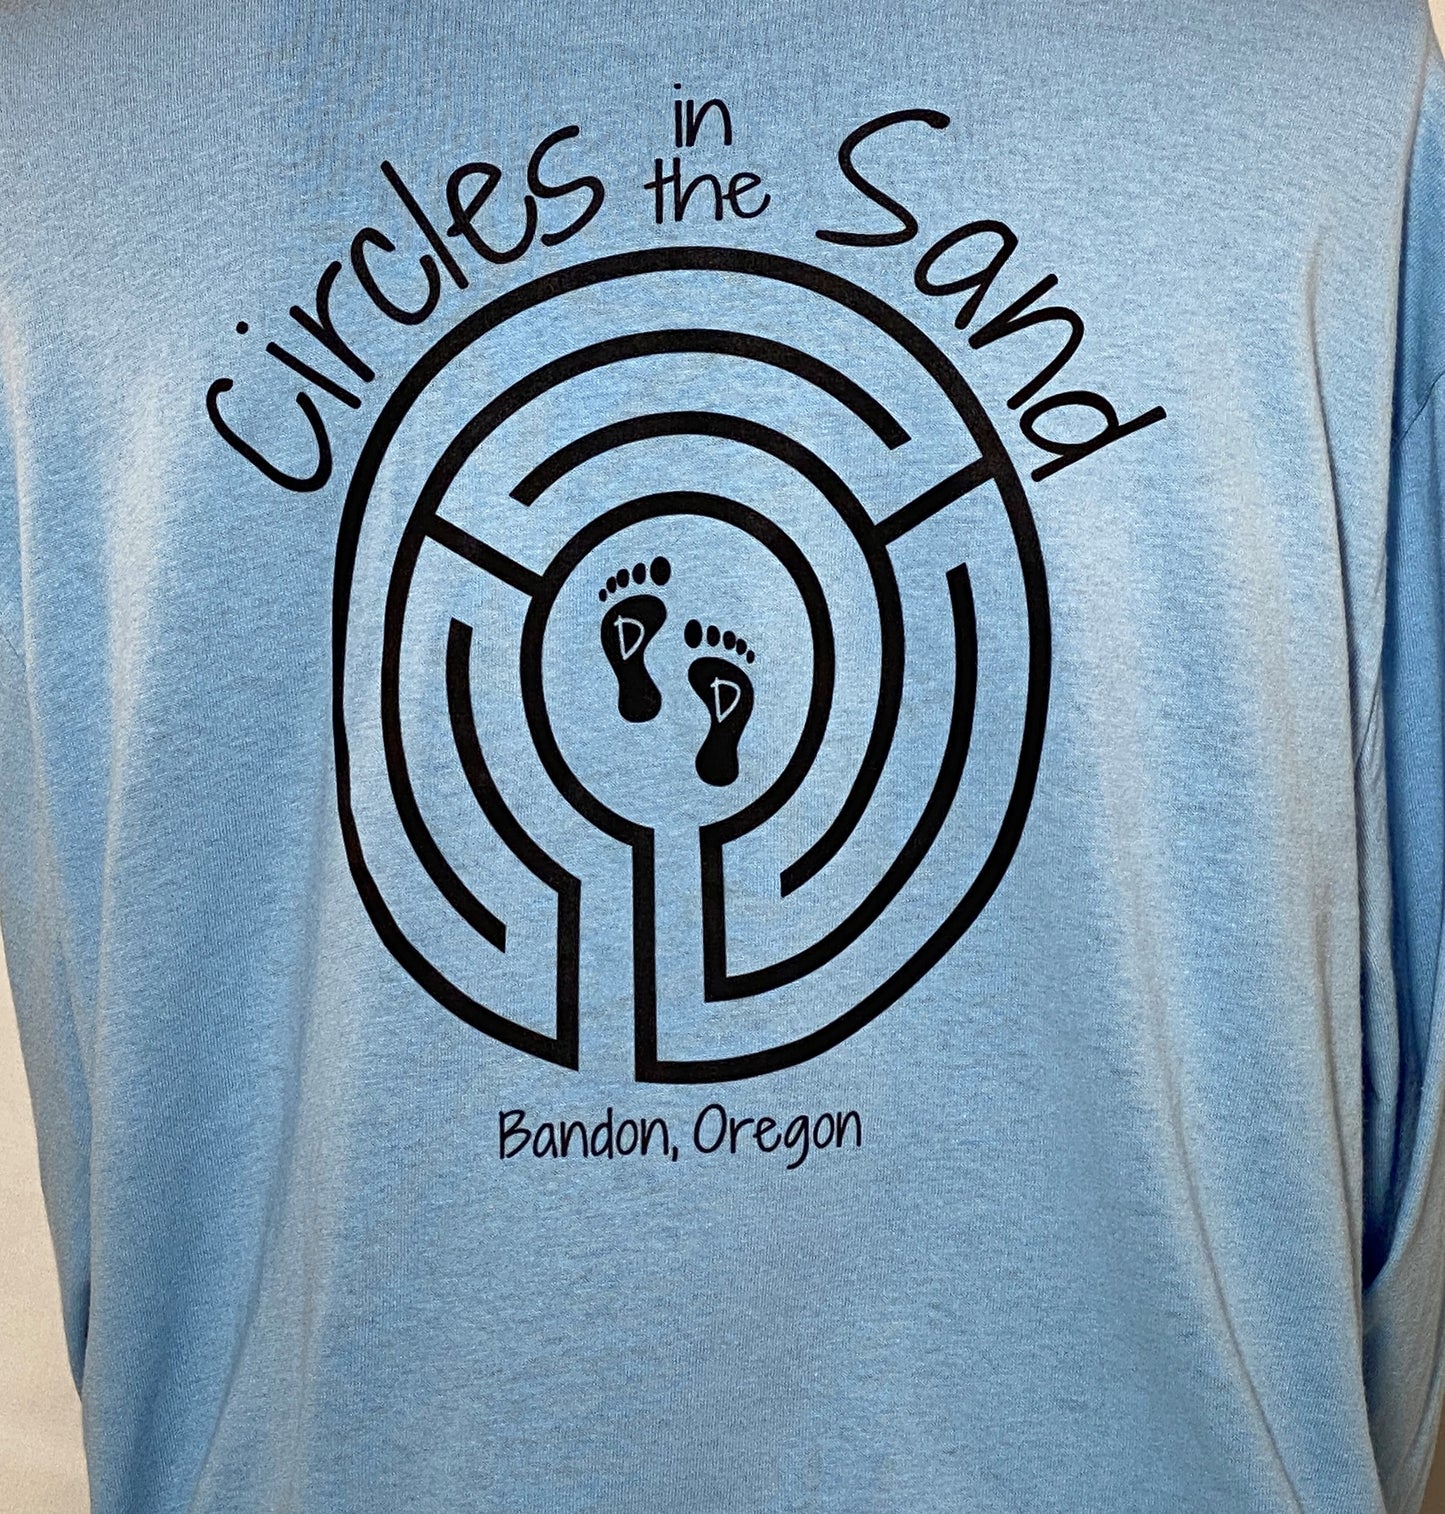 "See you on the sand" Light Blue Long-sleeved T-shirt